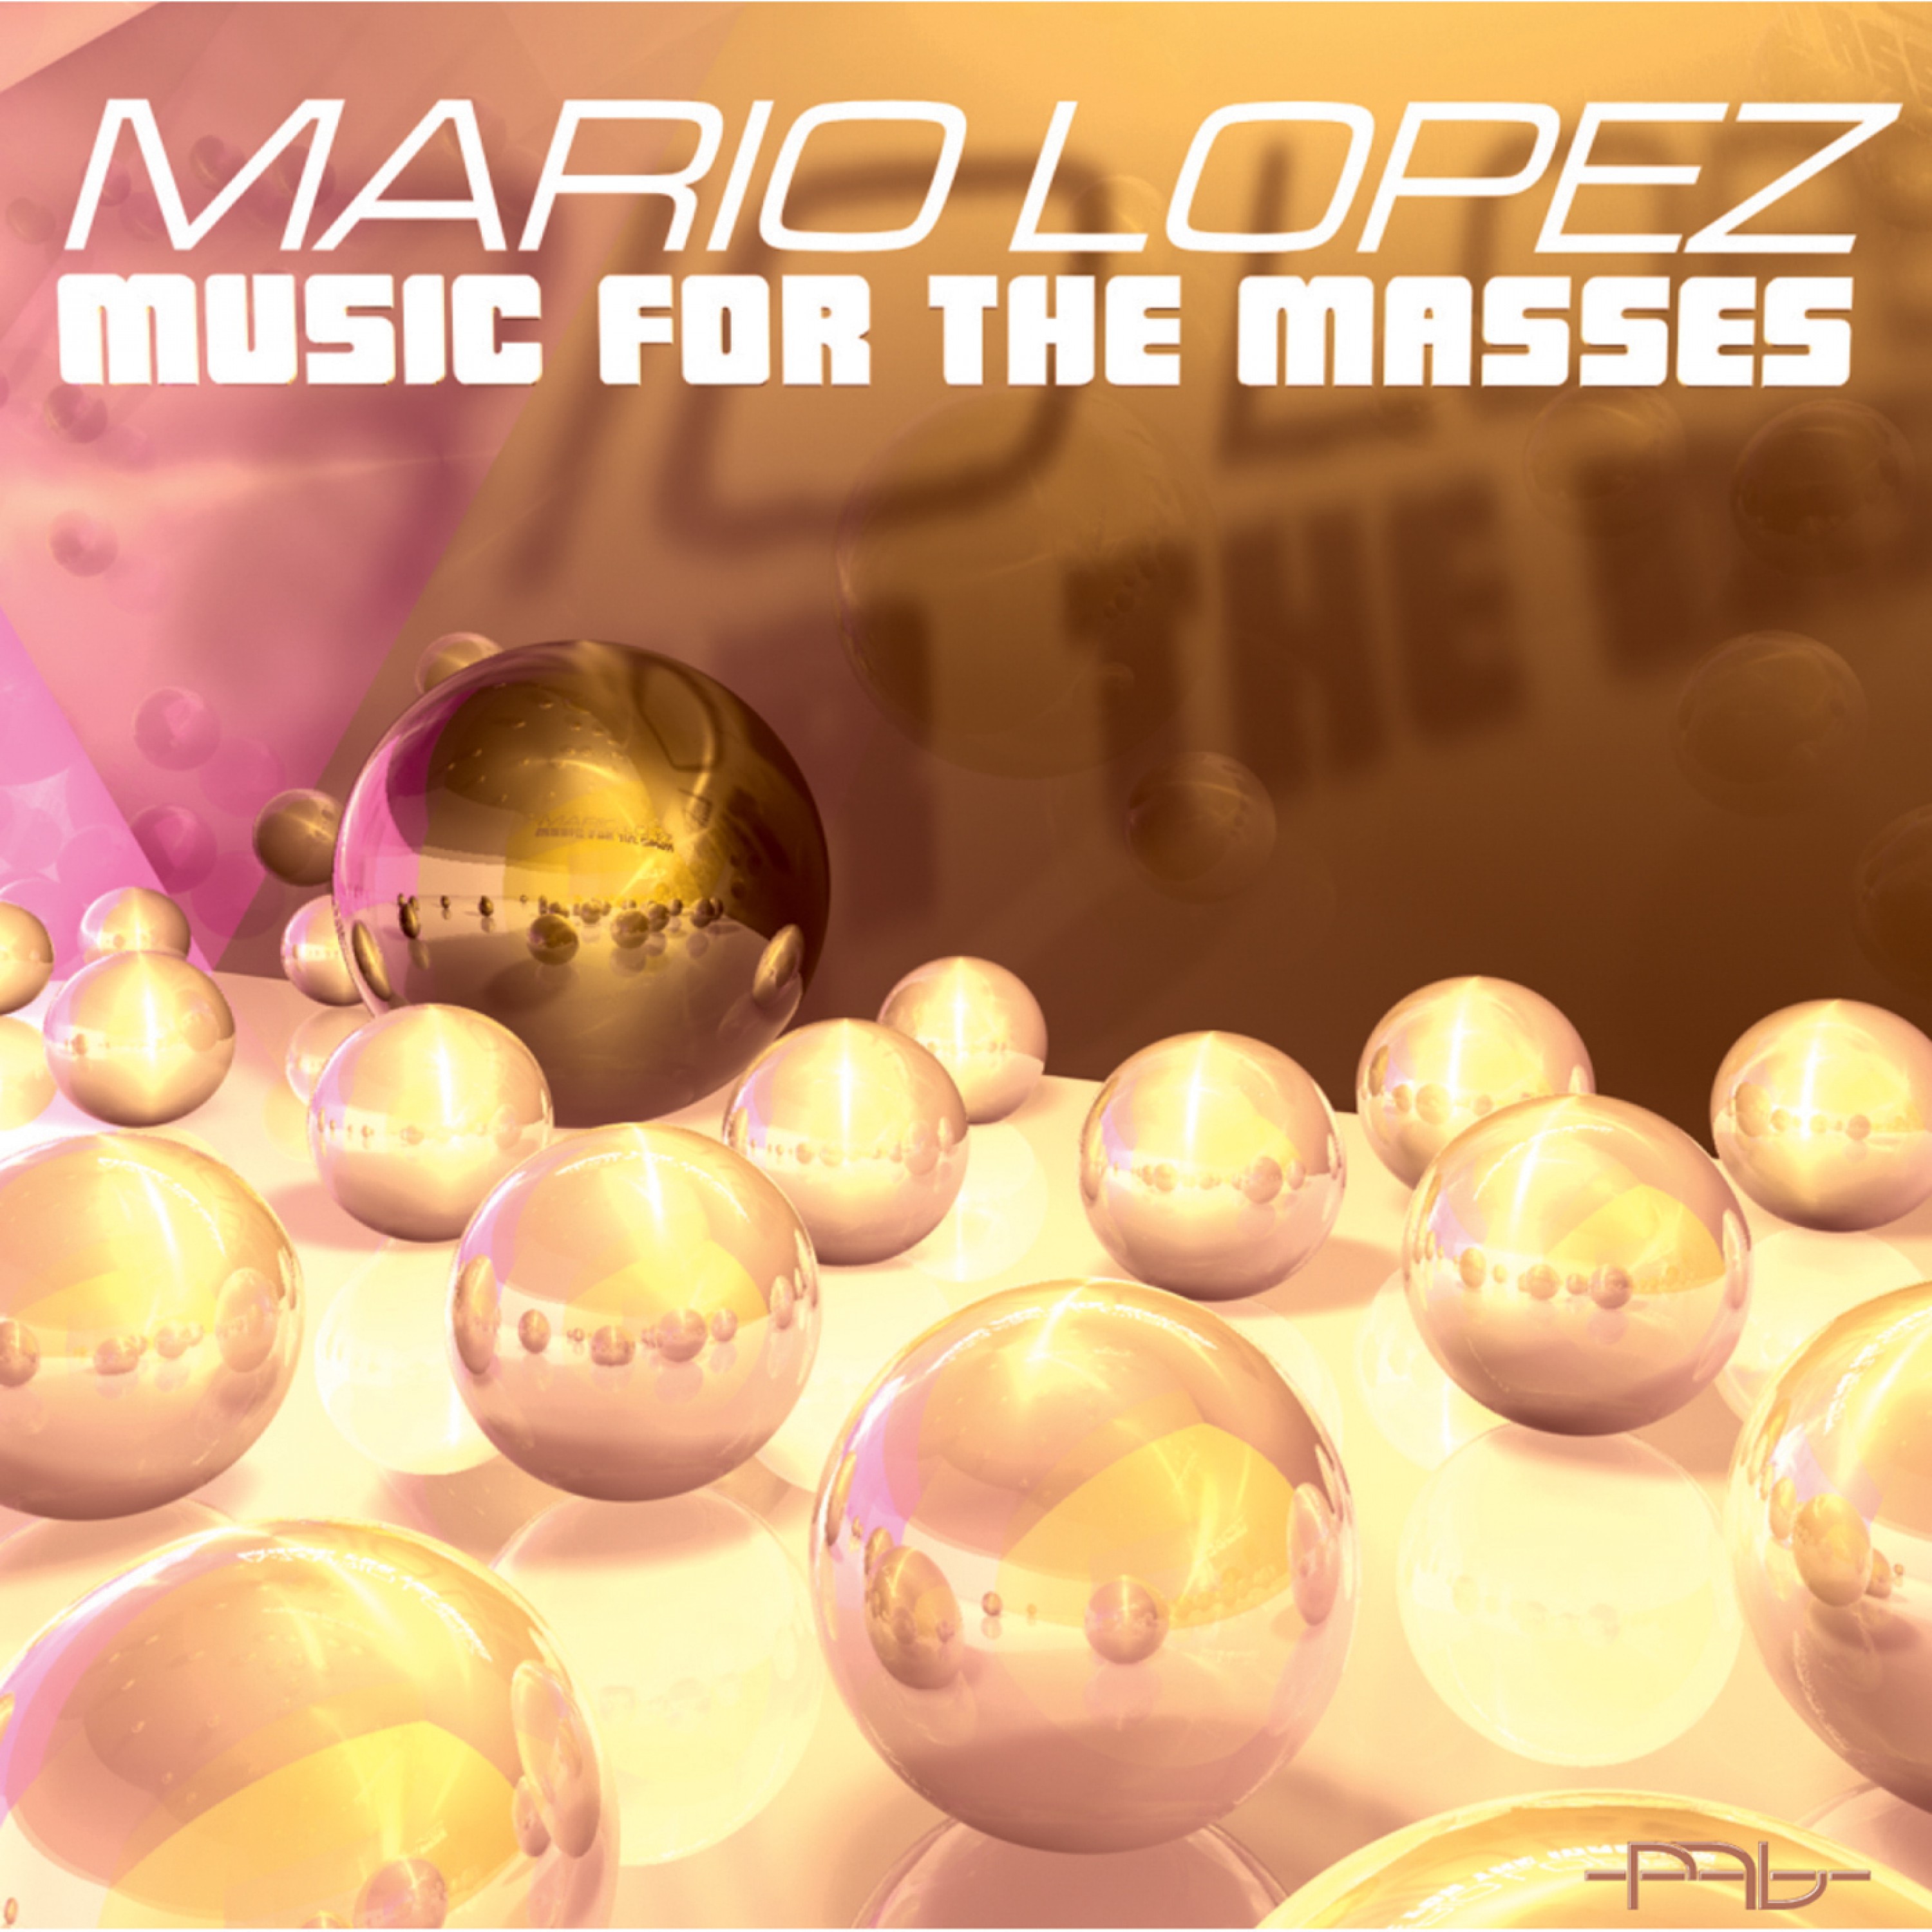 The One and Only (C-Base Vs Mario Lopez Radio Cut)